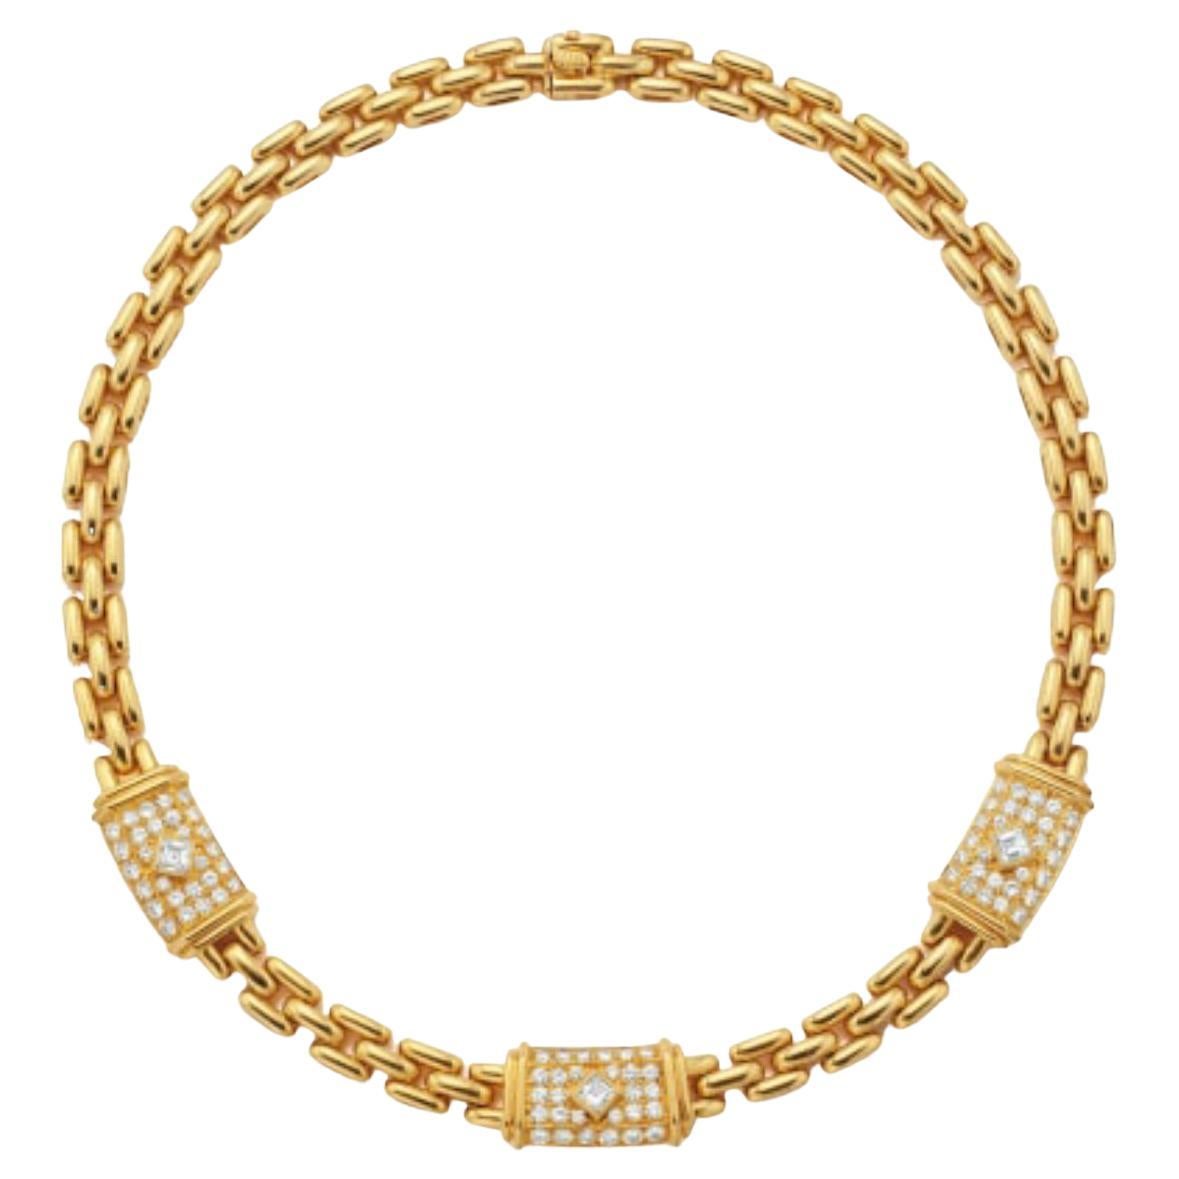 Cartier “Maillon” Yellow Gold Necklace with Diamonds